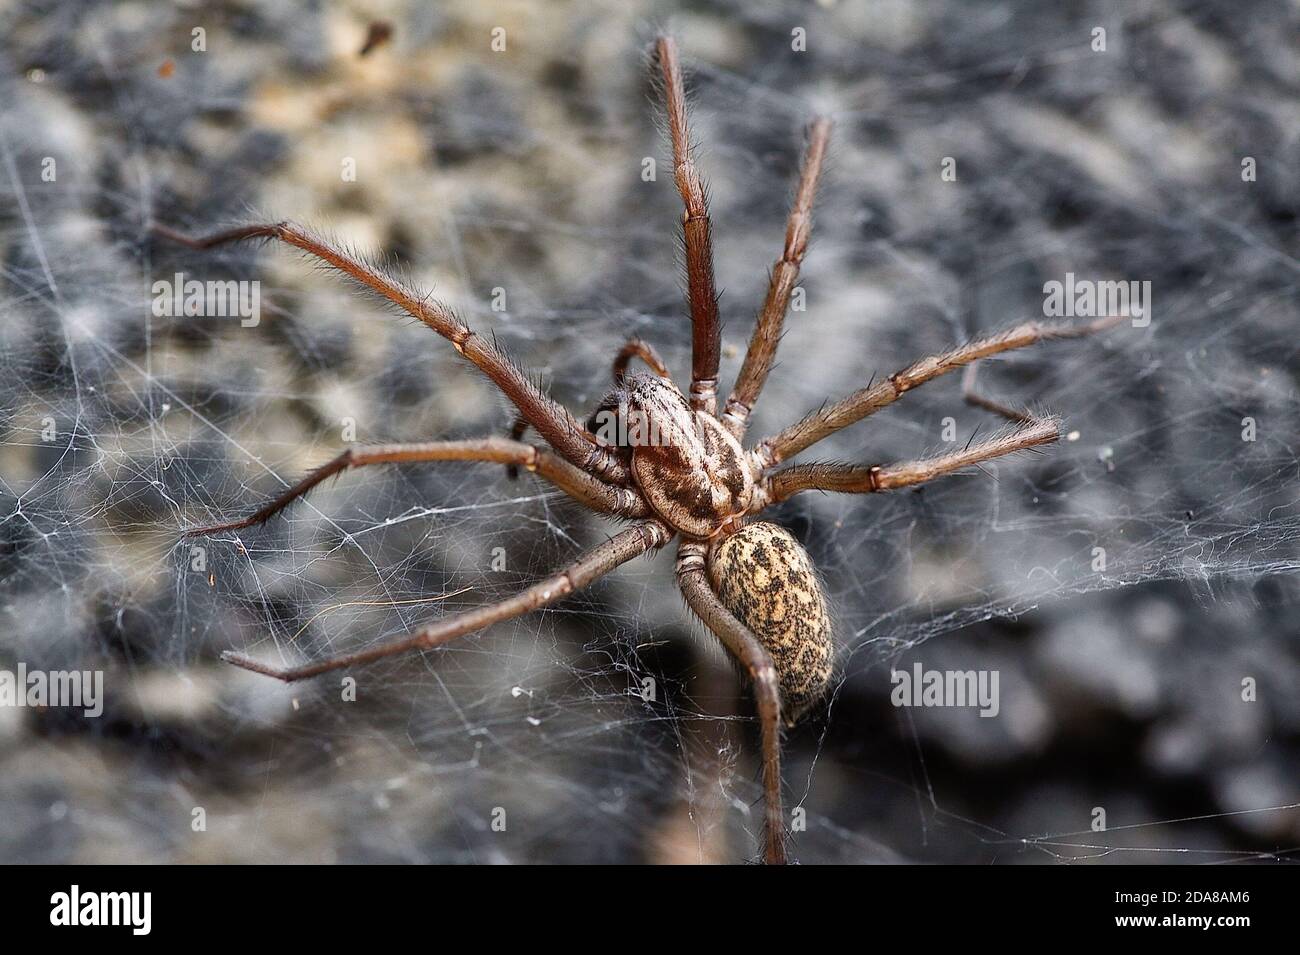 Disgusting Spider Stock Photo